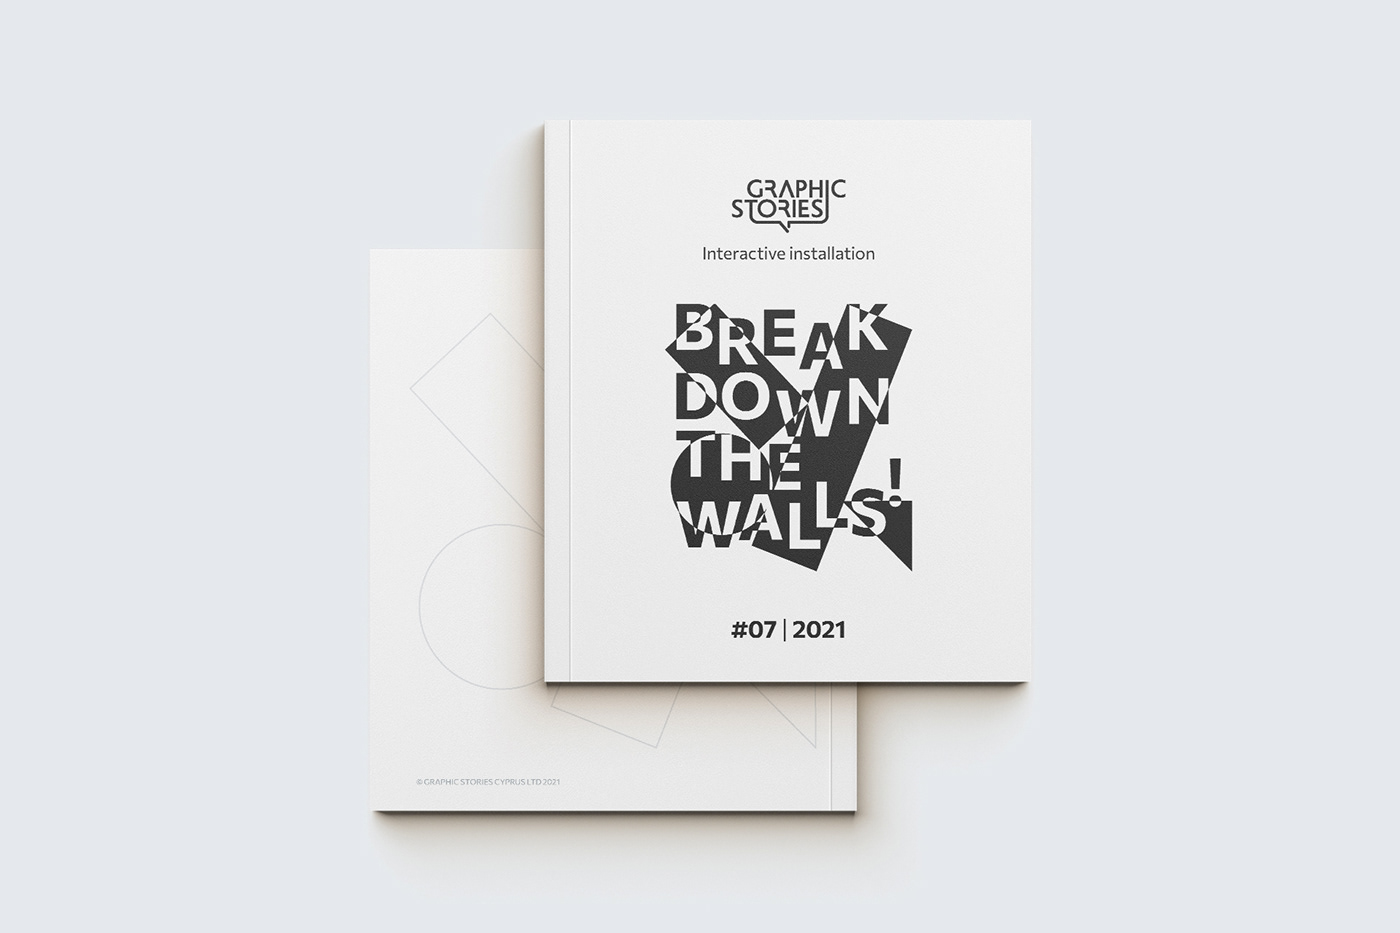 book book cover book design books Break Down The Walls Graphic Designer graphic stories Graphic Stories Cyprus messages the wall